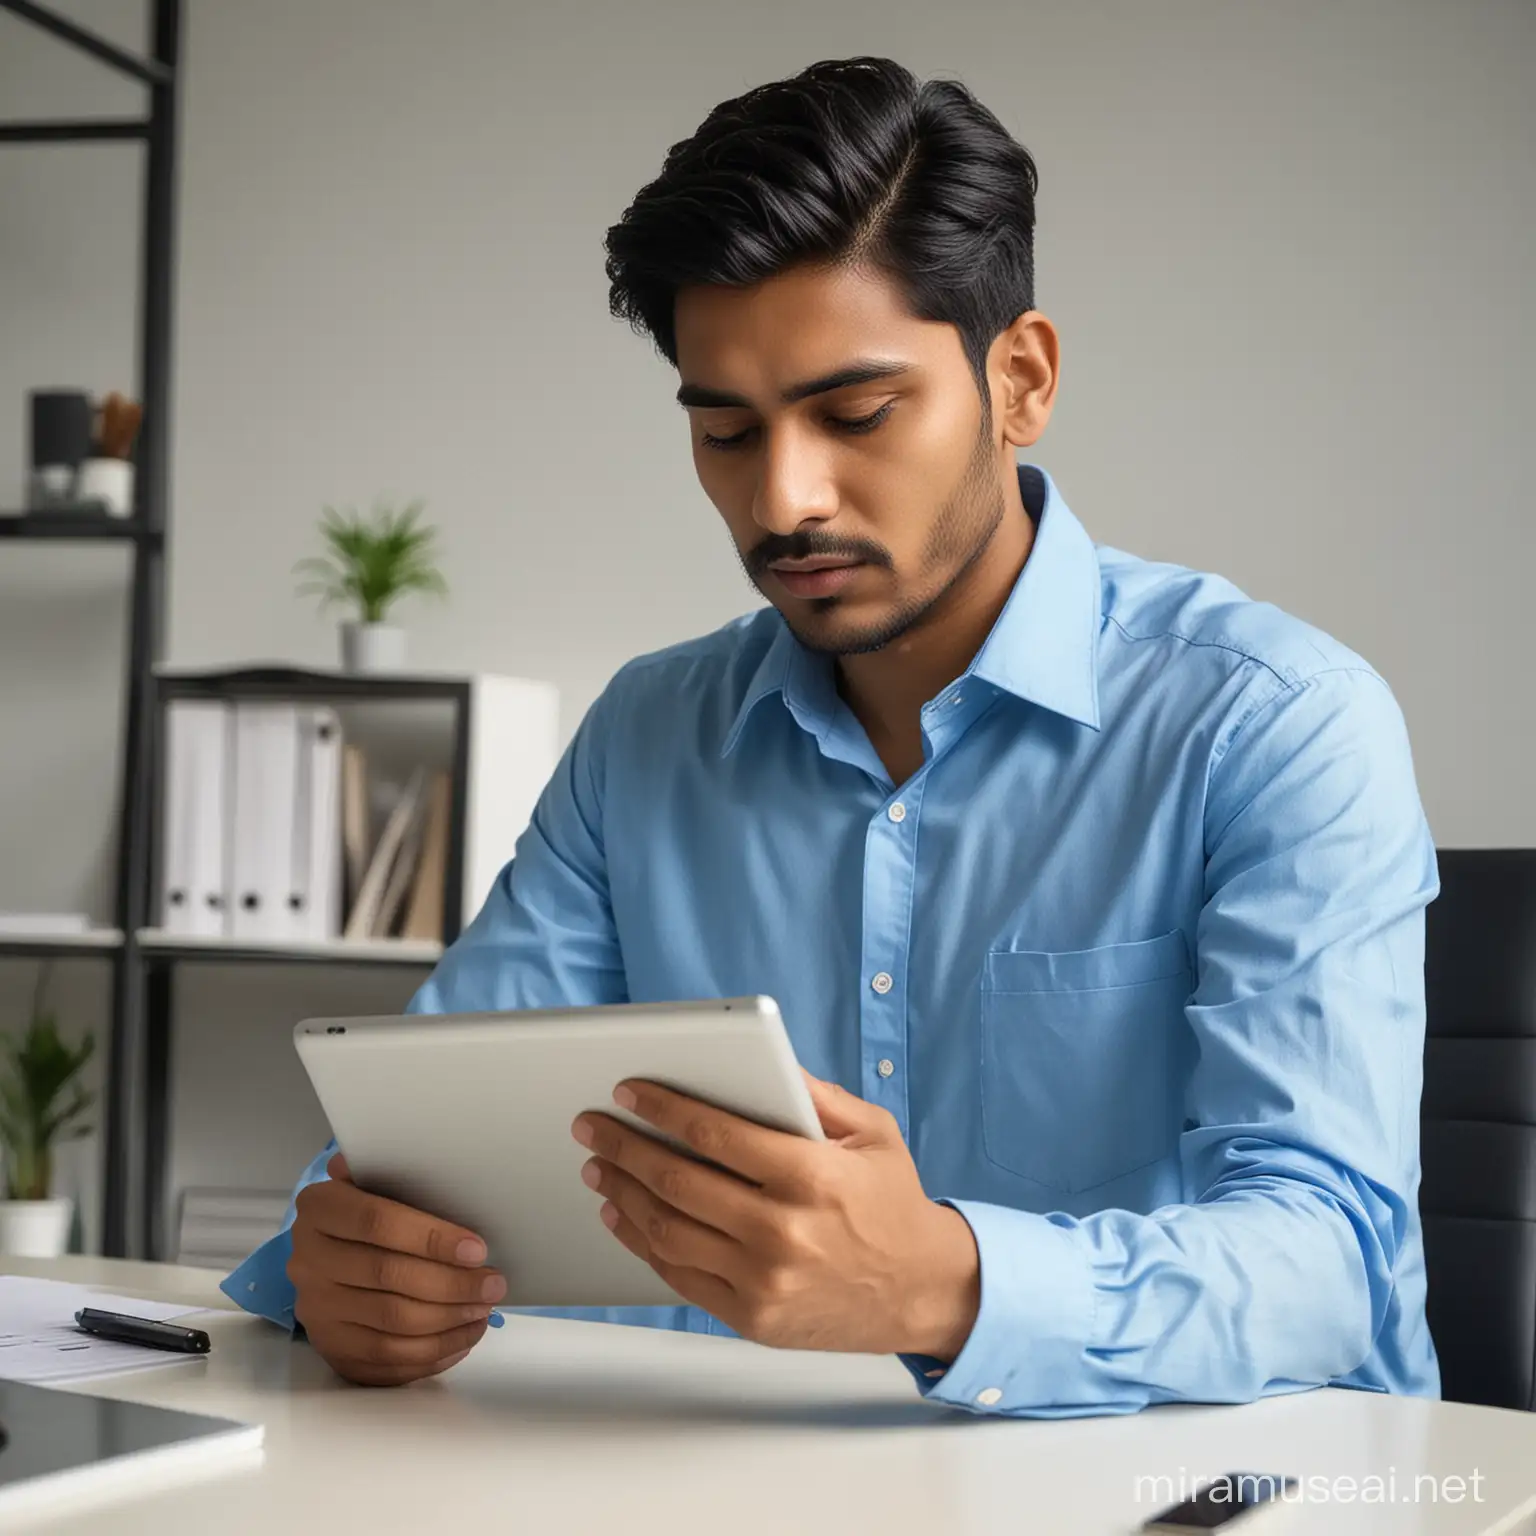 Indian Man in Blue Shirt Using Tablet at Office